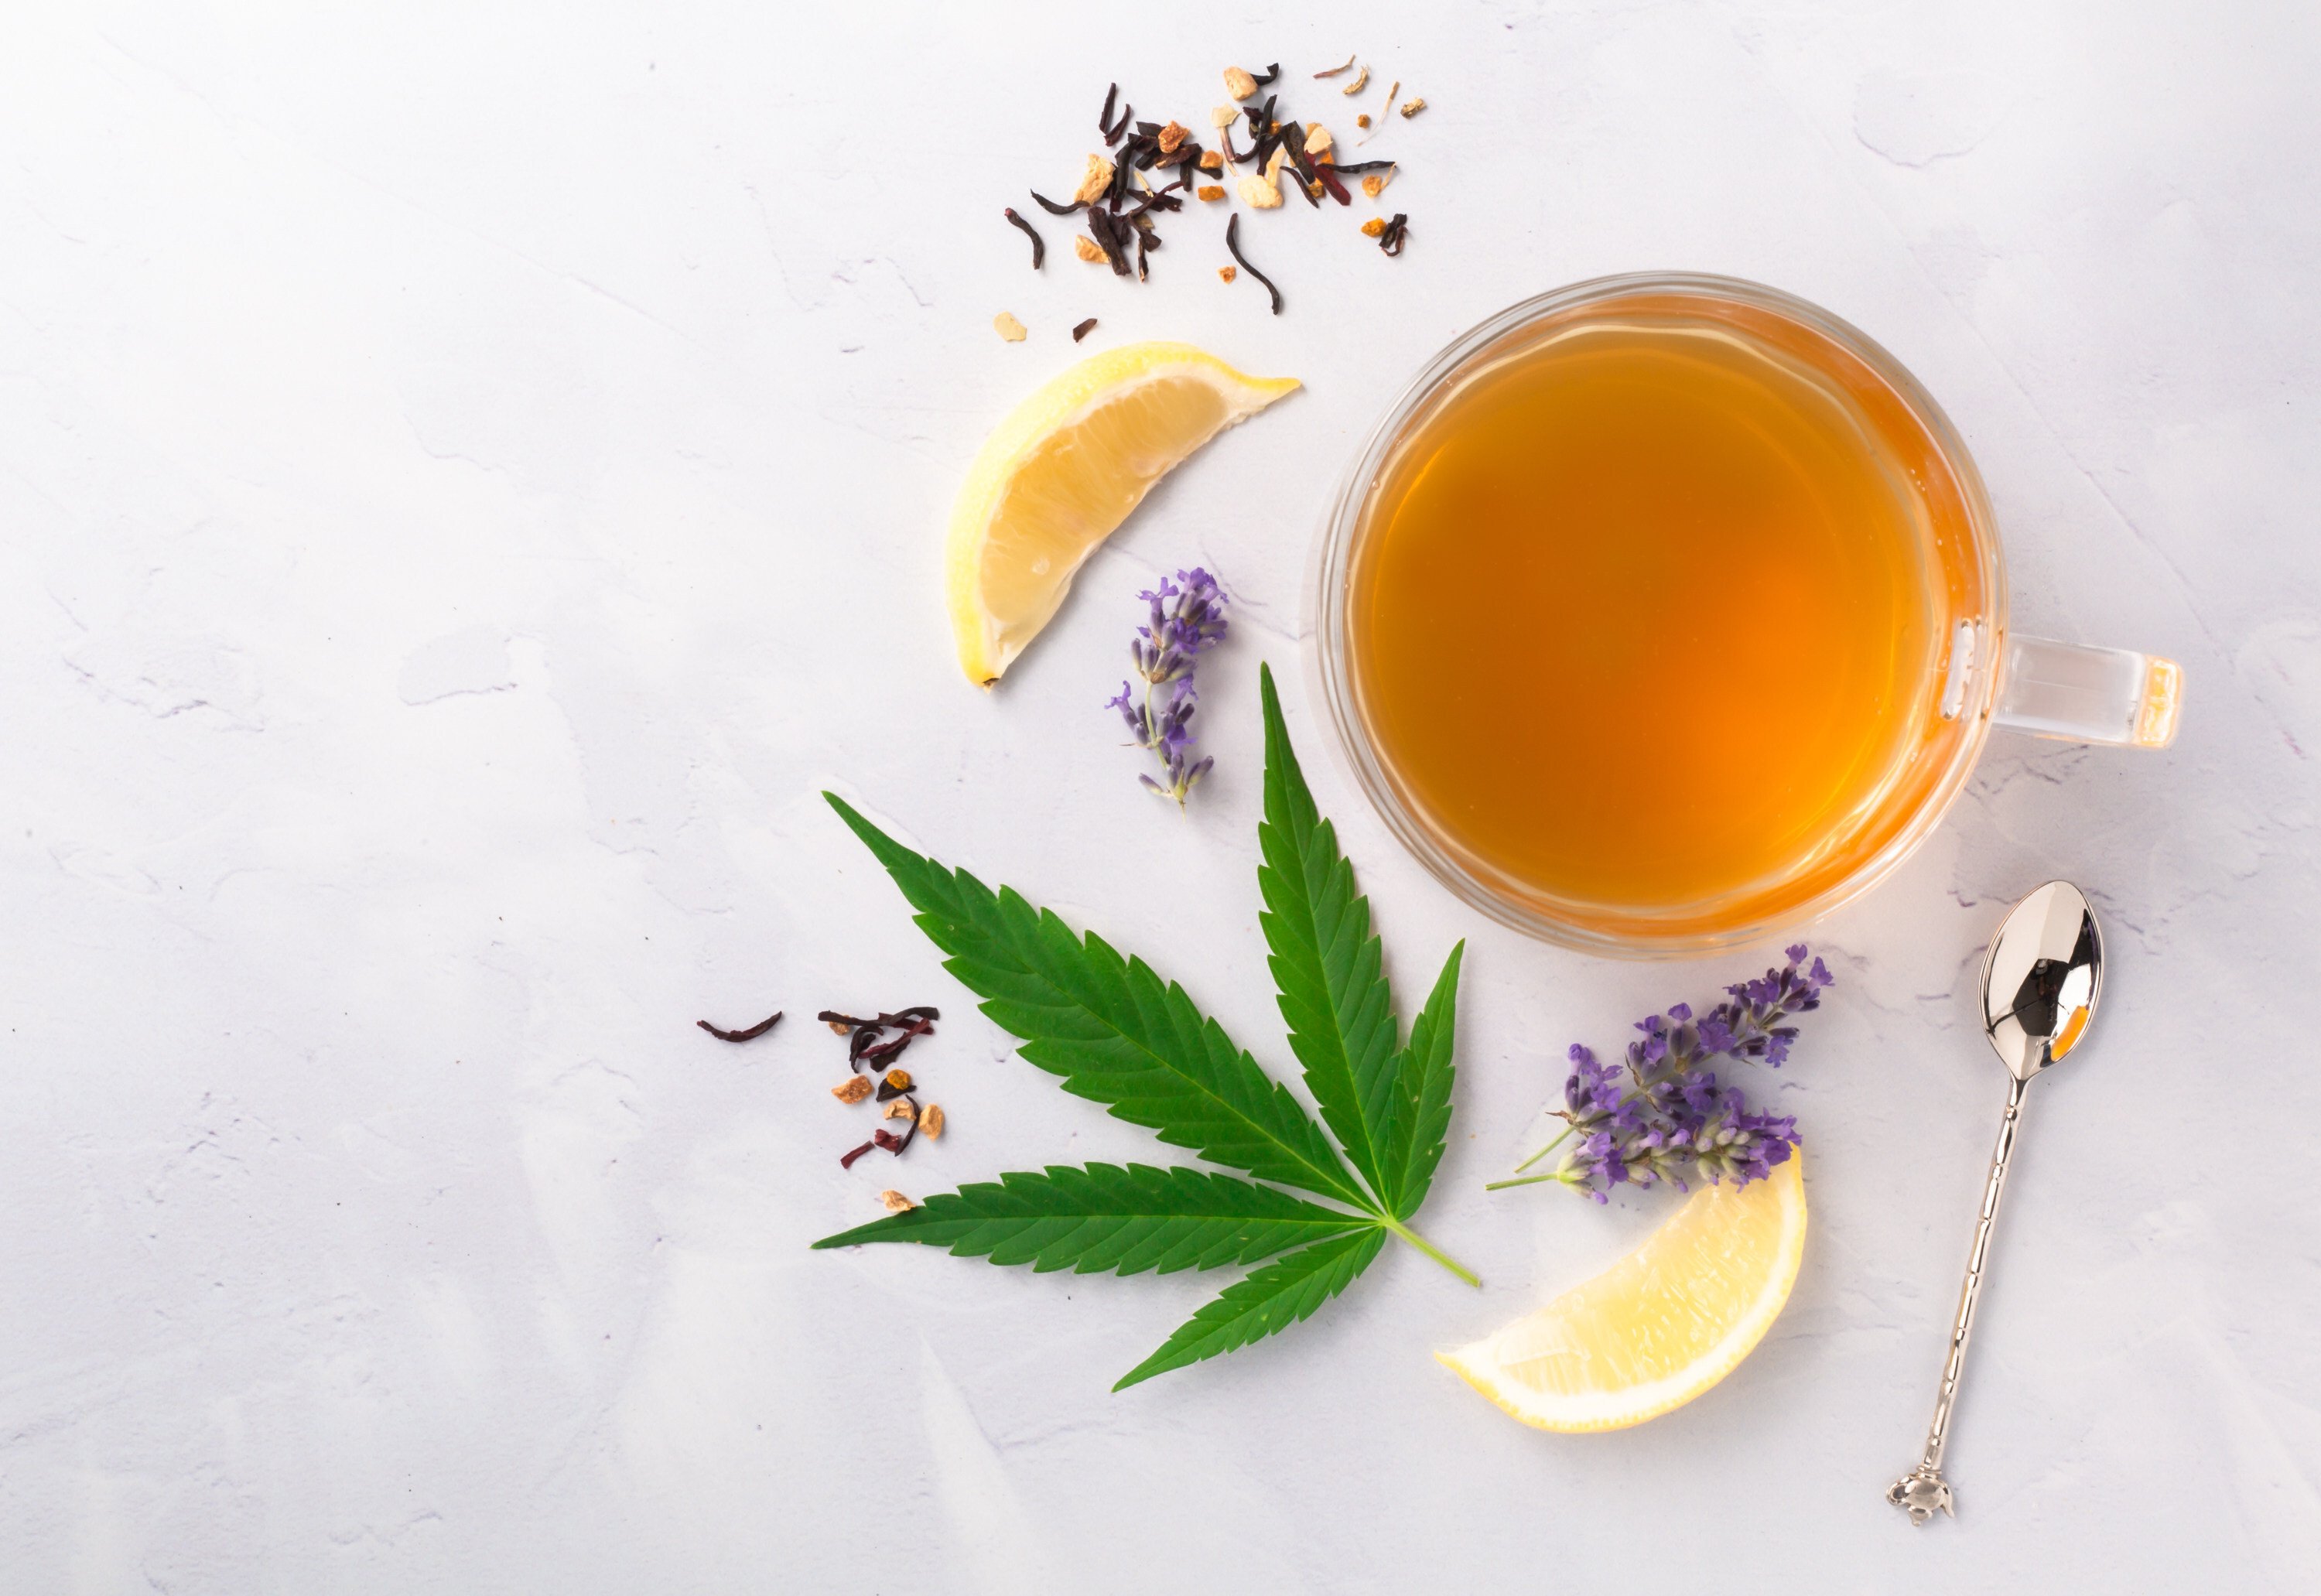 Across Hong Kong’s dining scene the cannabinoid CBD is now being infused in restaurant dishes and beer, as well as teas and coffees. Photo: Getty Images